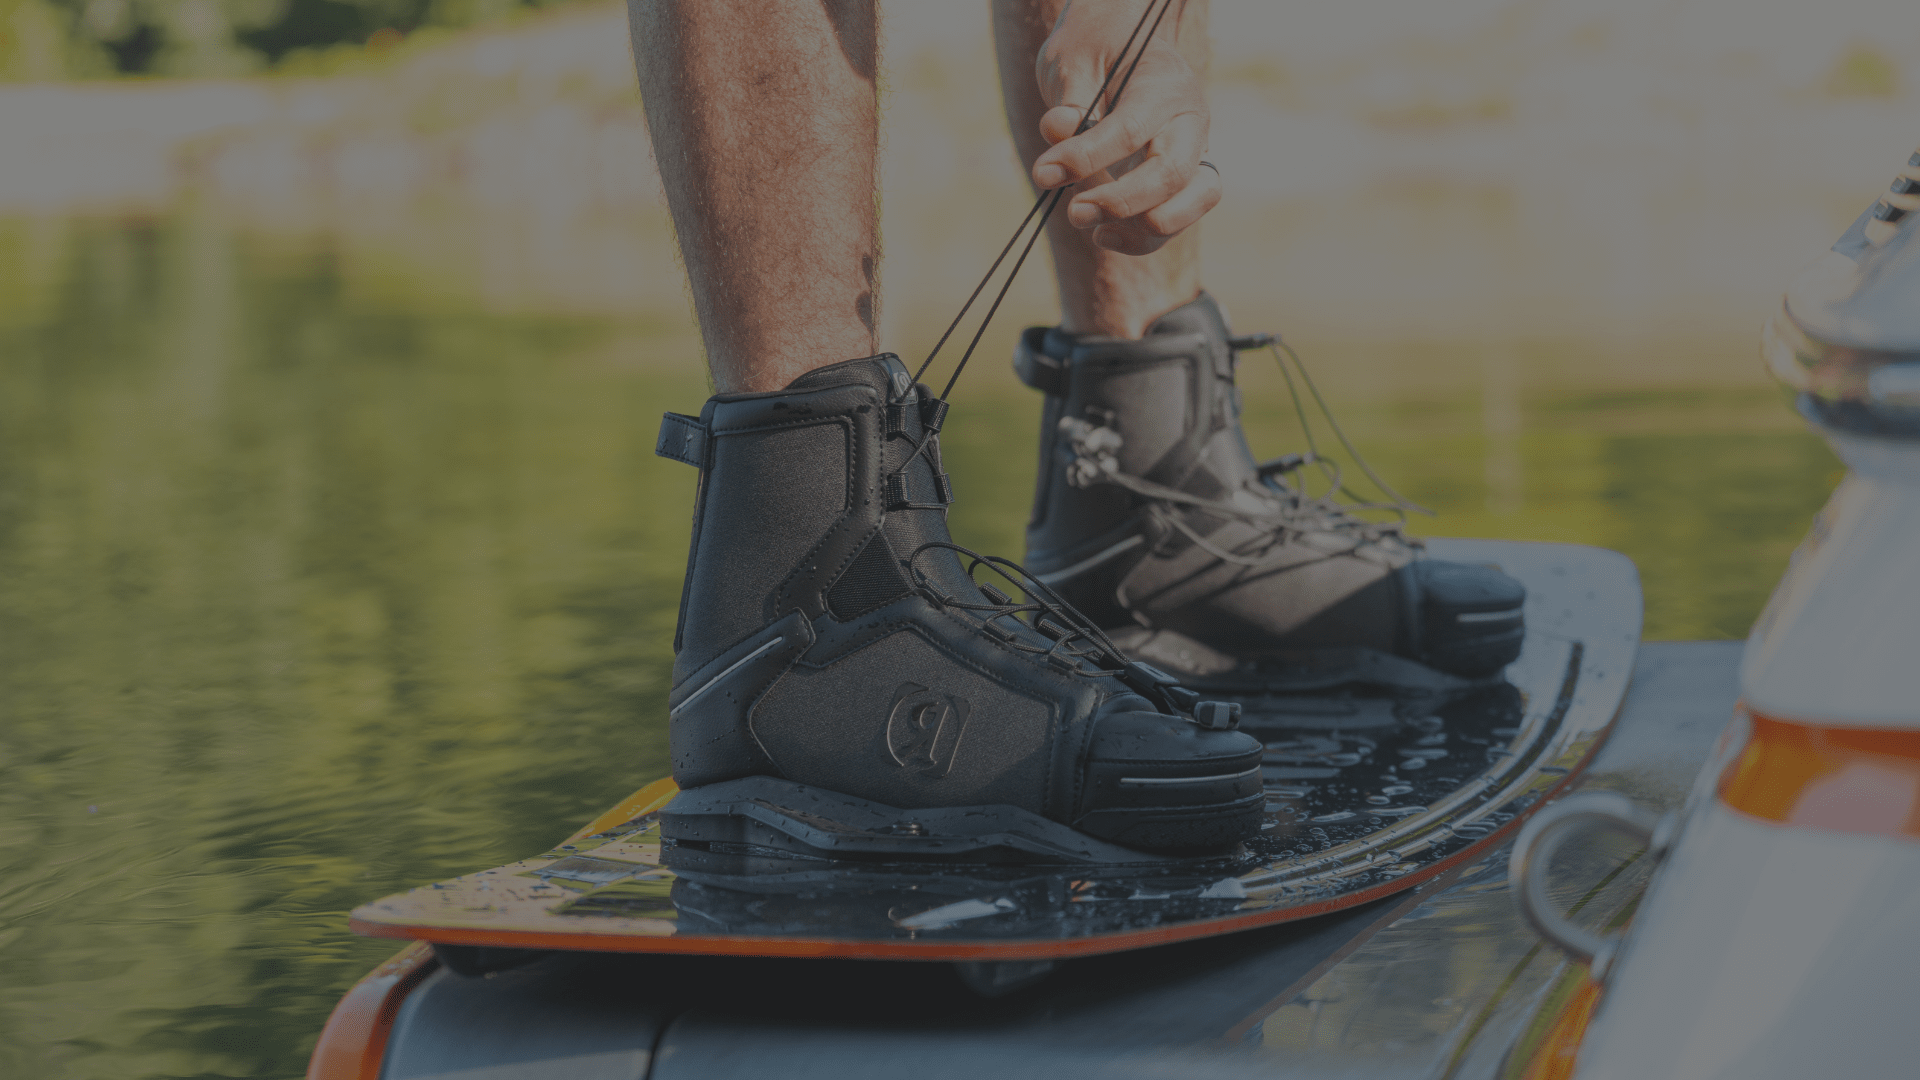 How to Wakeboard: Beginner Tips from Experts - Ride the Wake